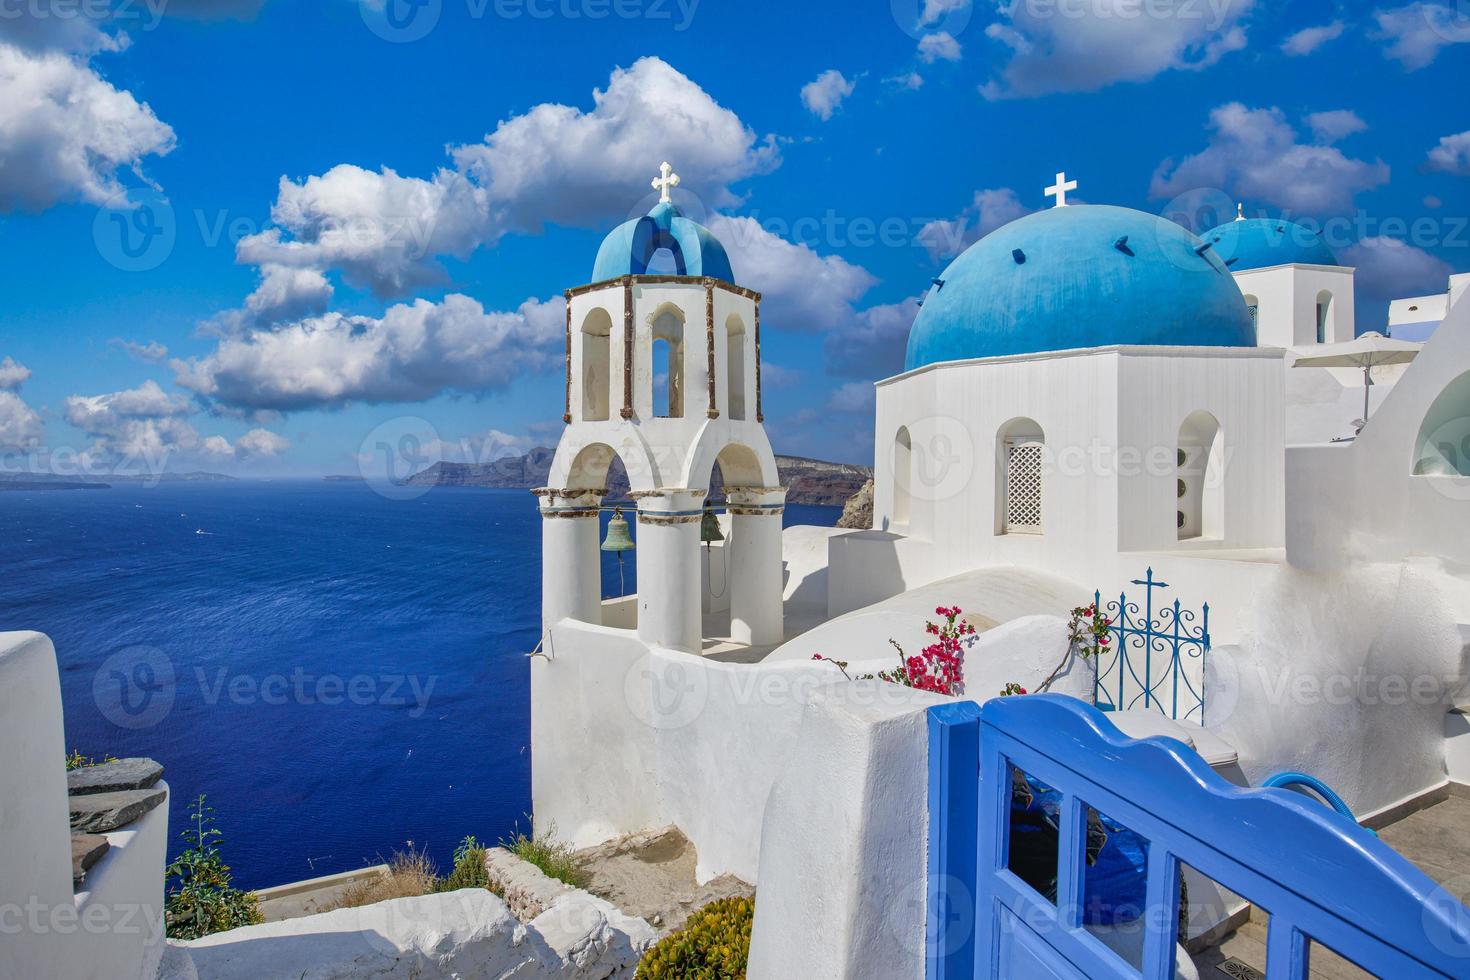 View of Oia town in Santorini island in Greece. Famous Greek landscape, blue domes over white architecture. Luxury summer holiday destination, romantic travel scenic. Beautiful cityscape and blue sea photo